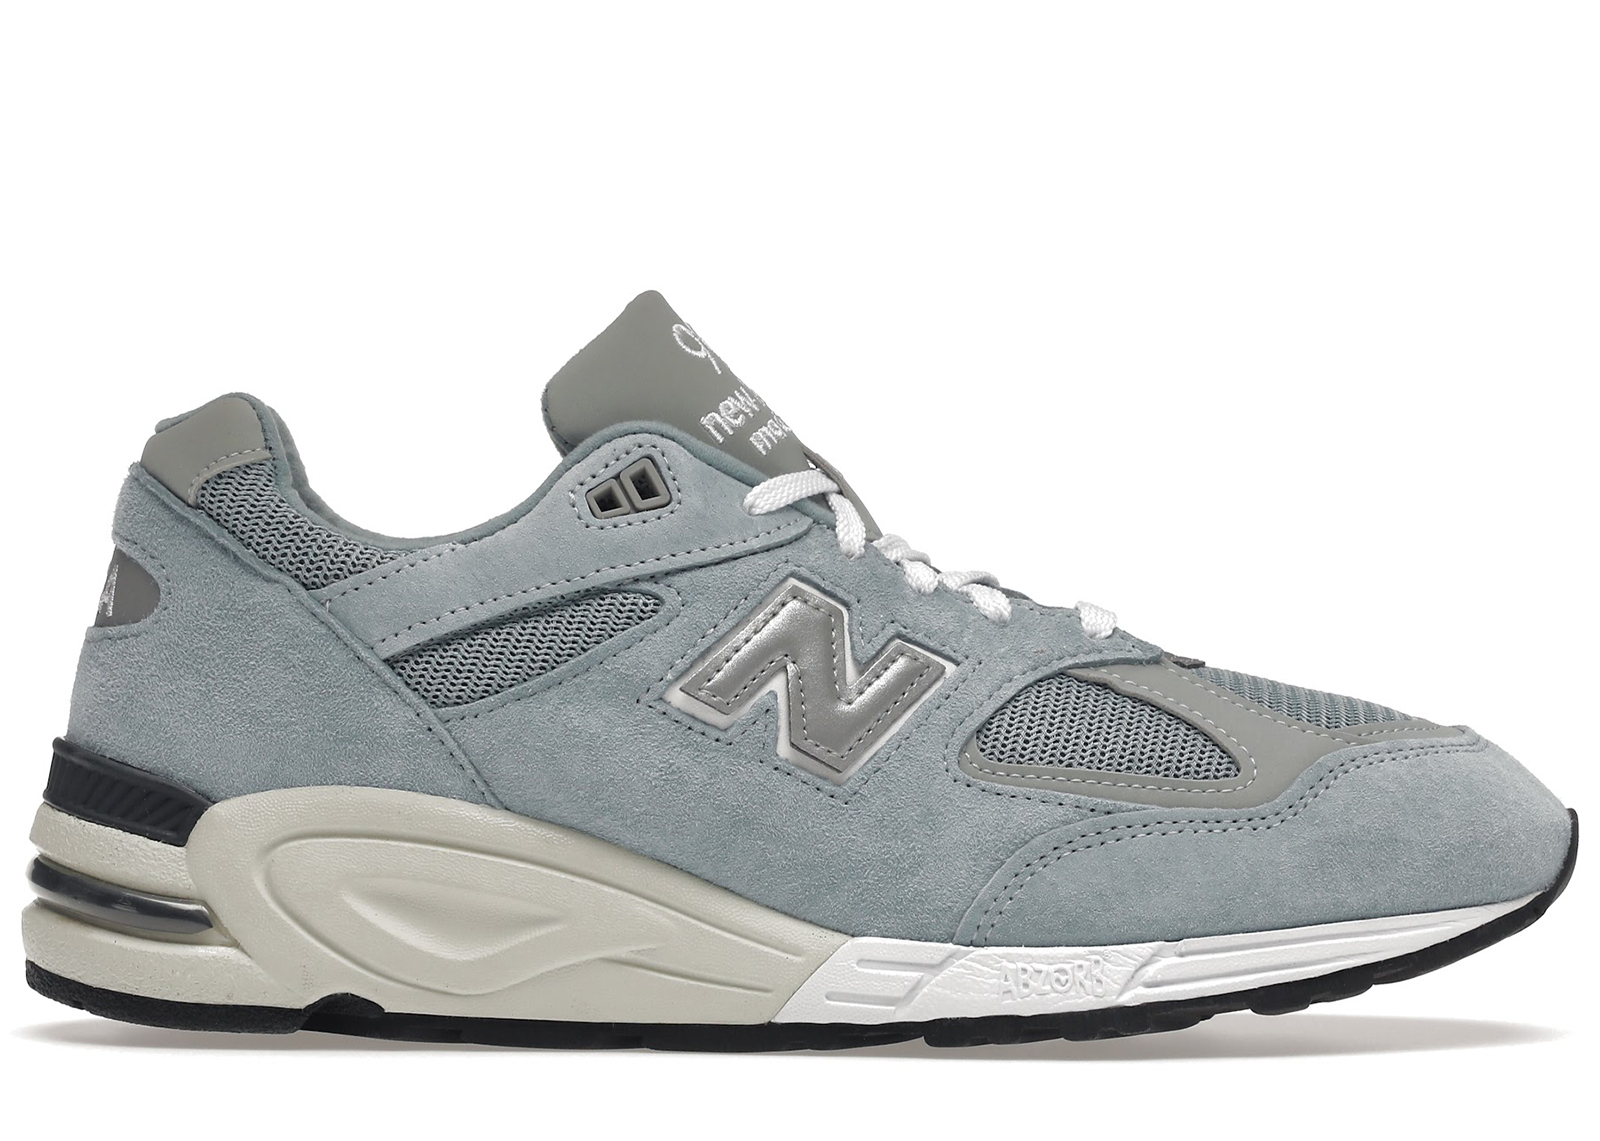 Buy New Balance 990v2 Shoes & Deadstock Sneakers